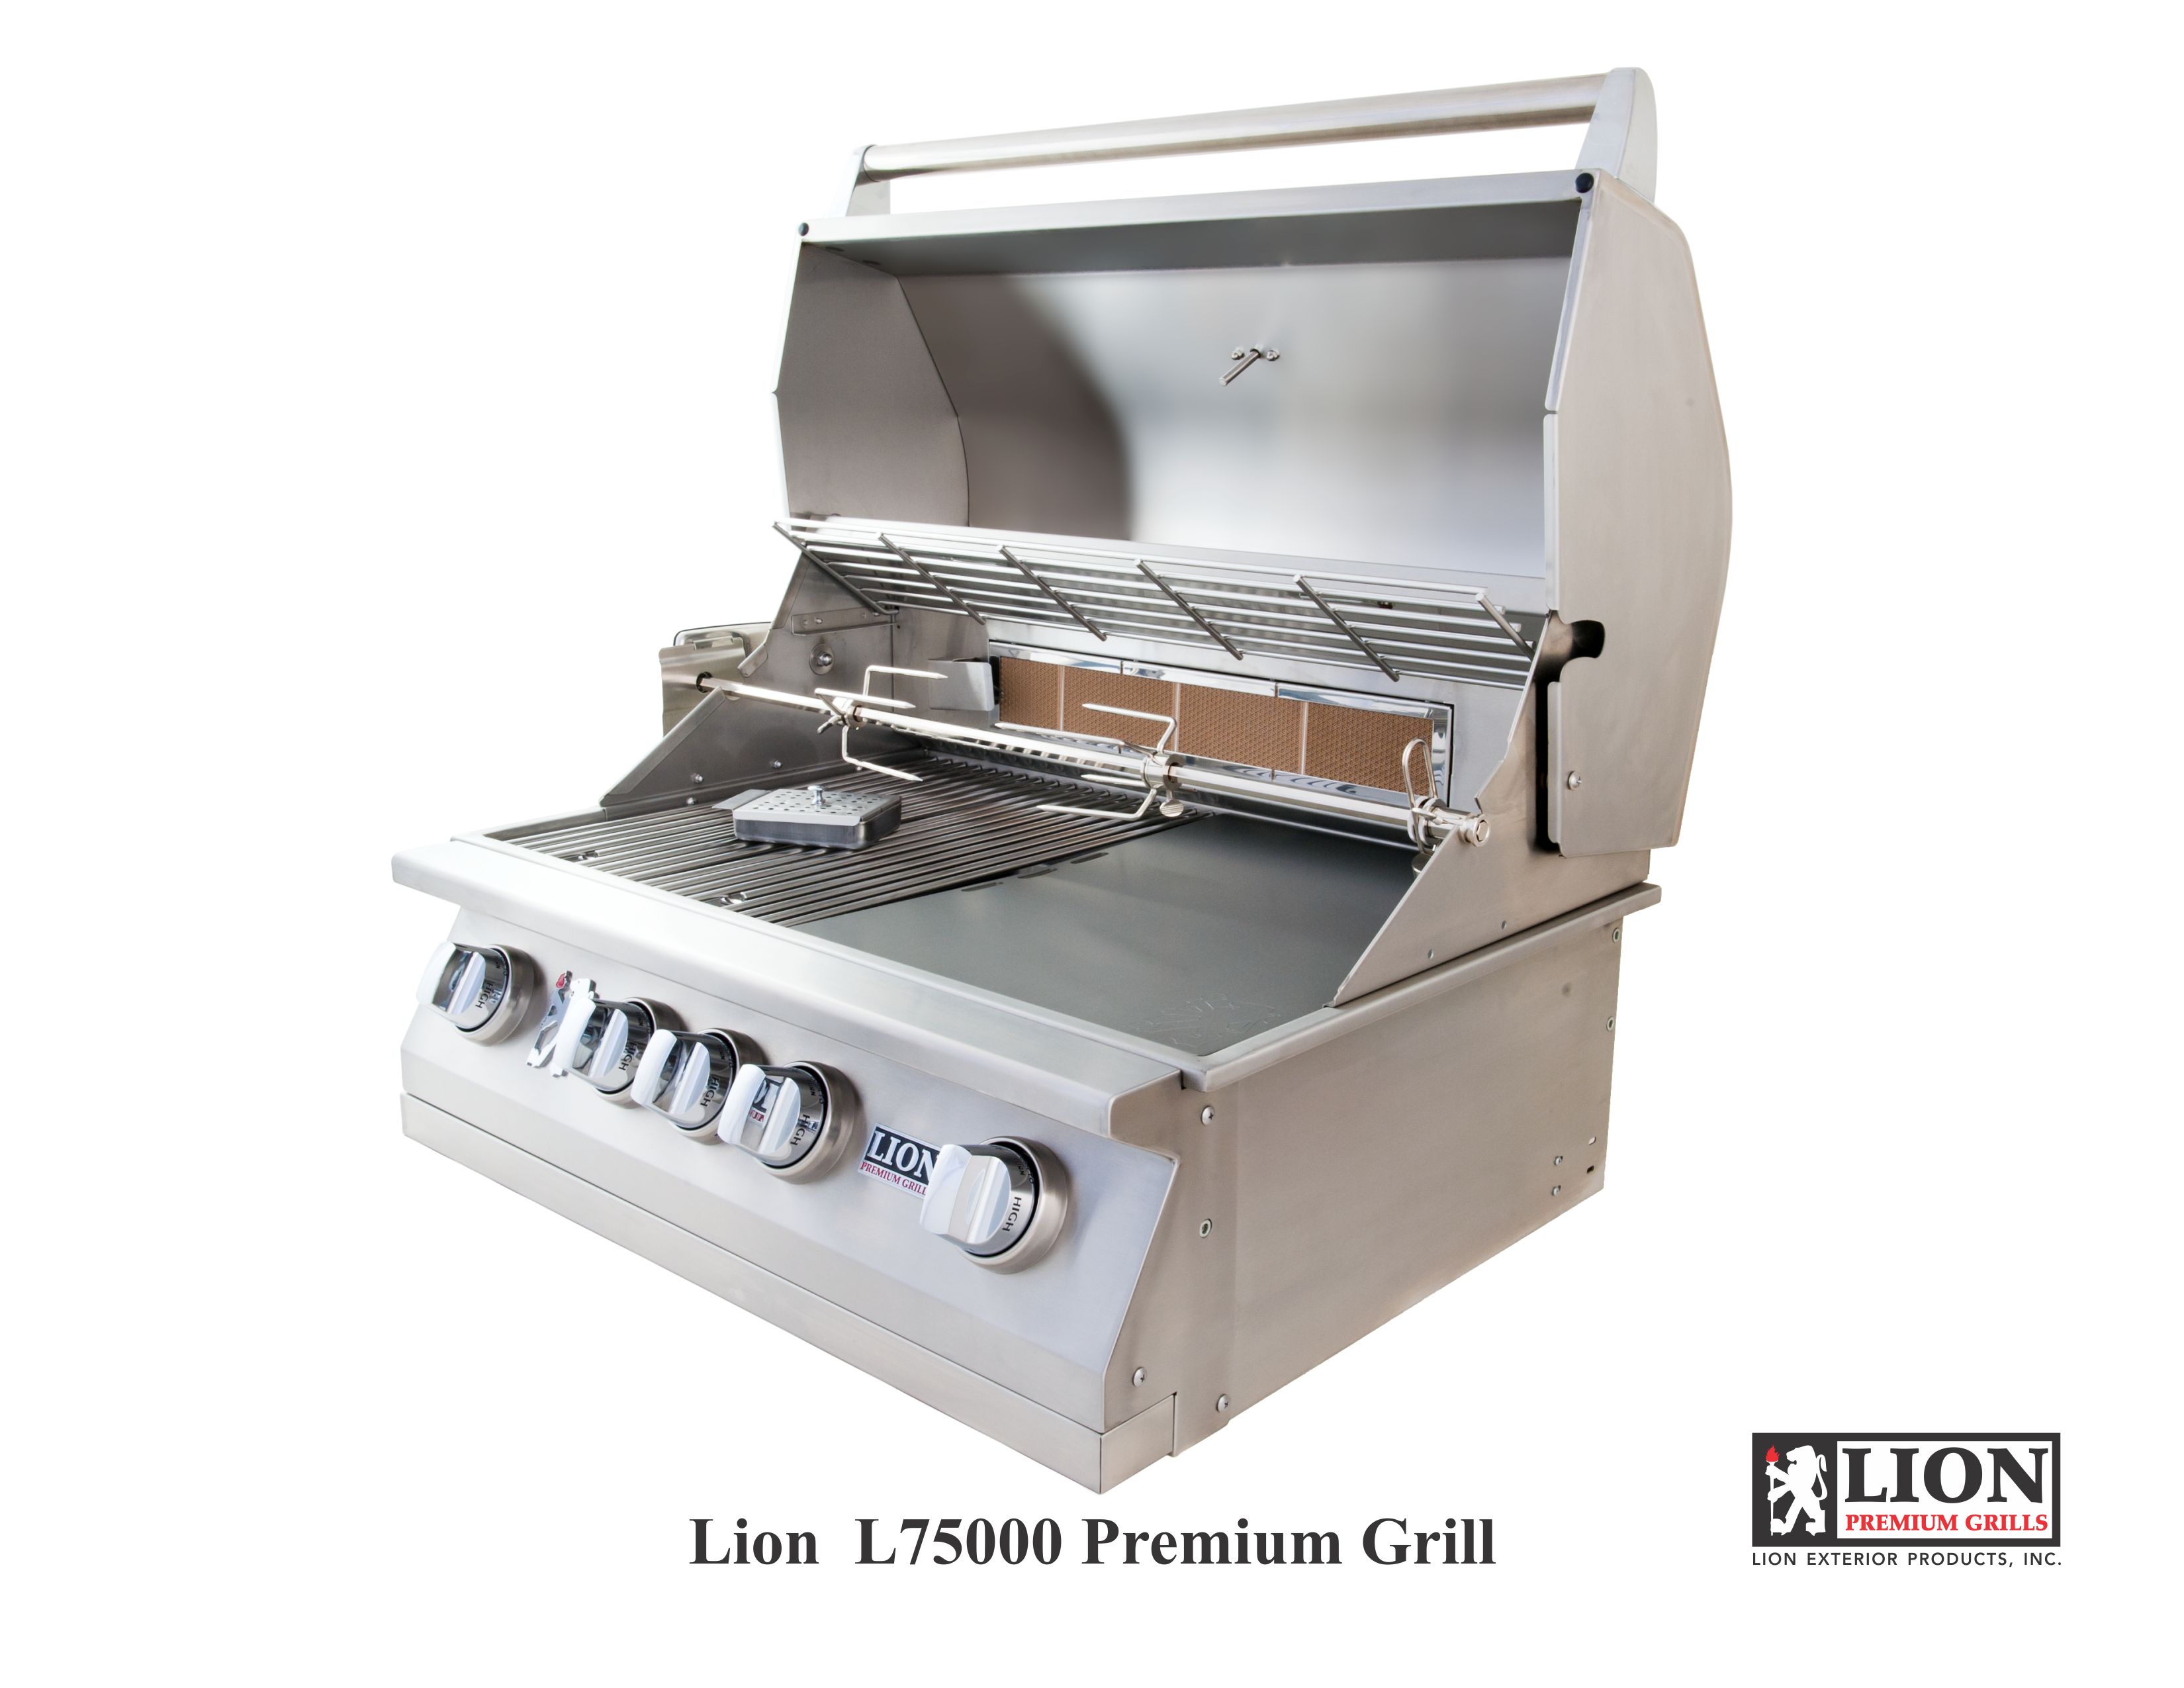 emulering Allerede peeling L75000 Grill – At 170.1 lbs it's the heaviest in its Class! – Lion Premium  Grills